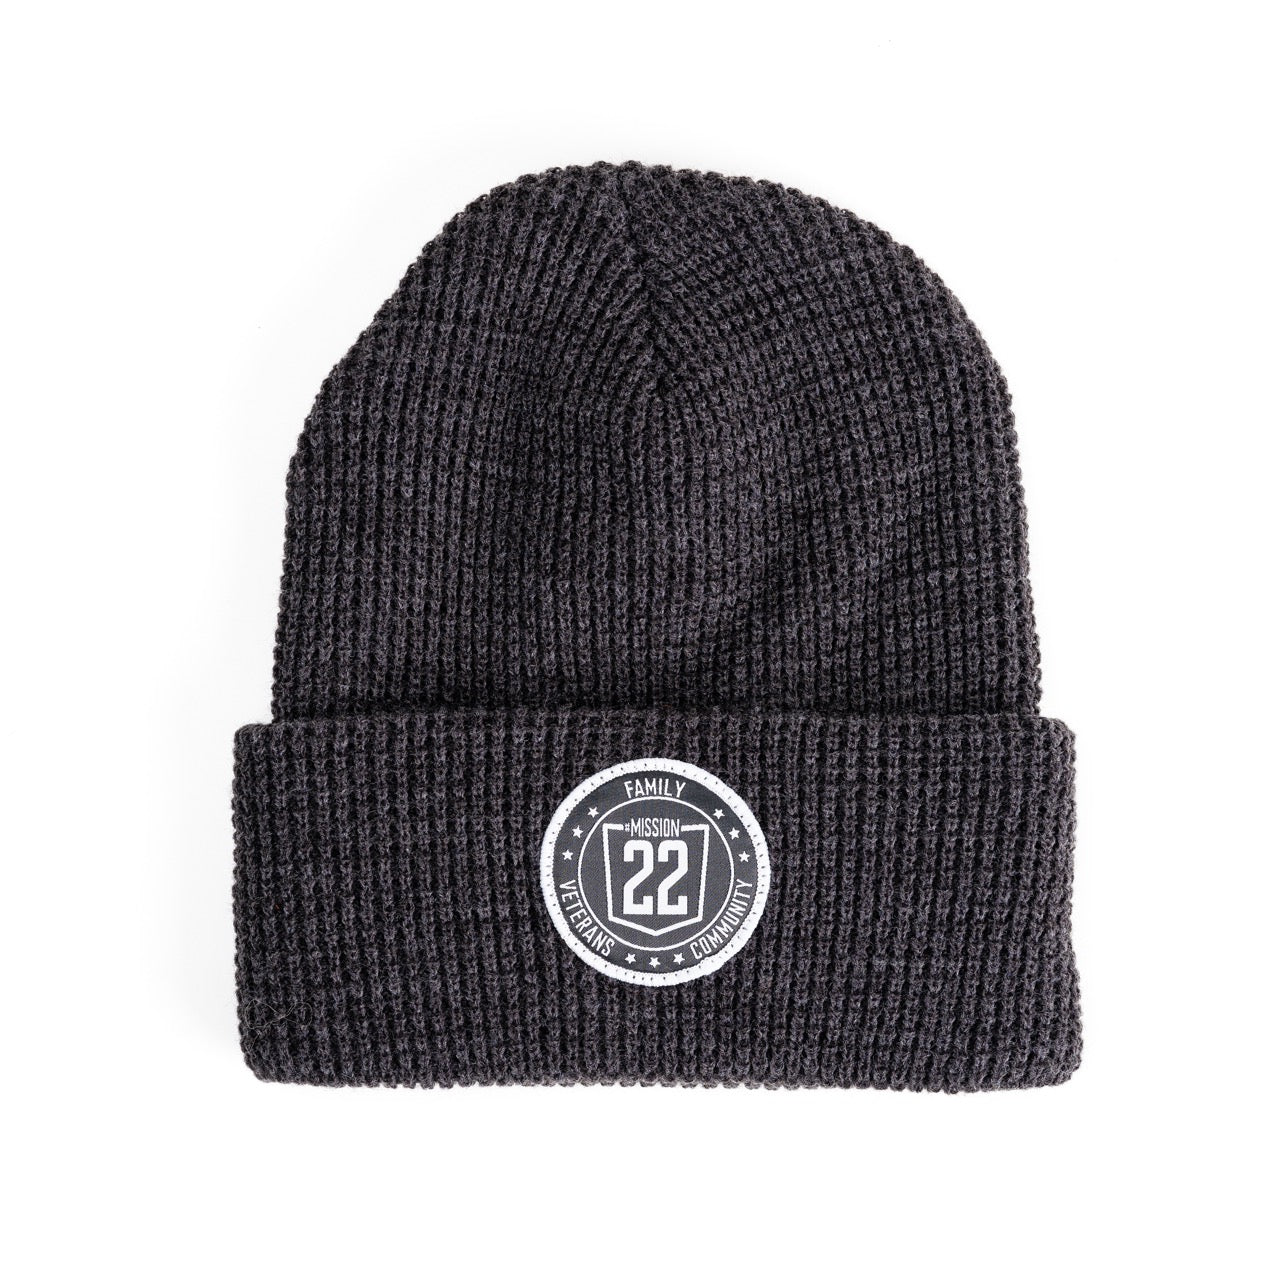 Product Image of Knit Cap #4